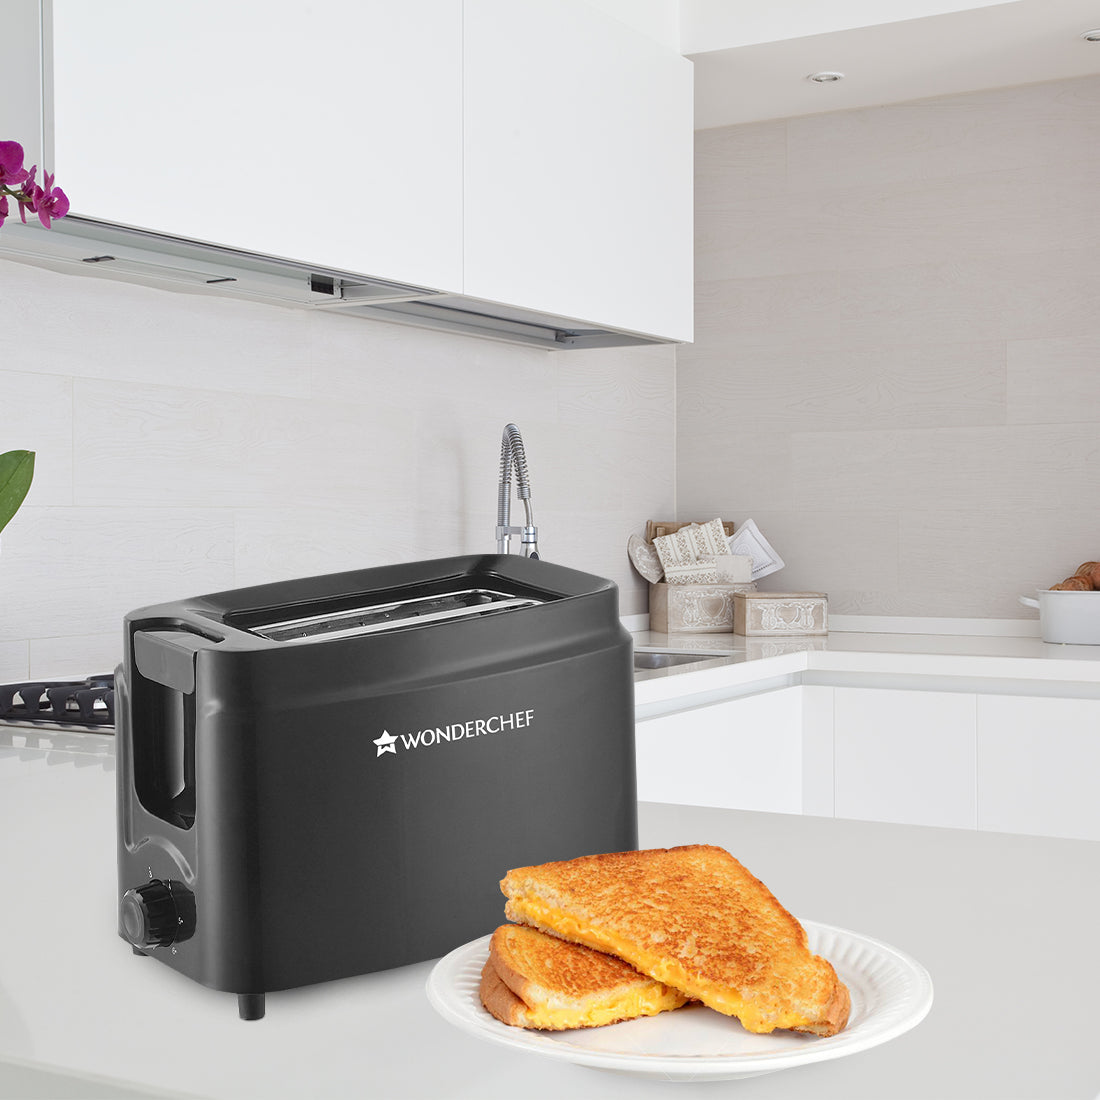 Acura Plus Pop Up Slice Toaster, 750W, 7 Browning Controls, Removable Crumb Tray, 2 Years Warranty, Black